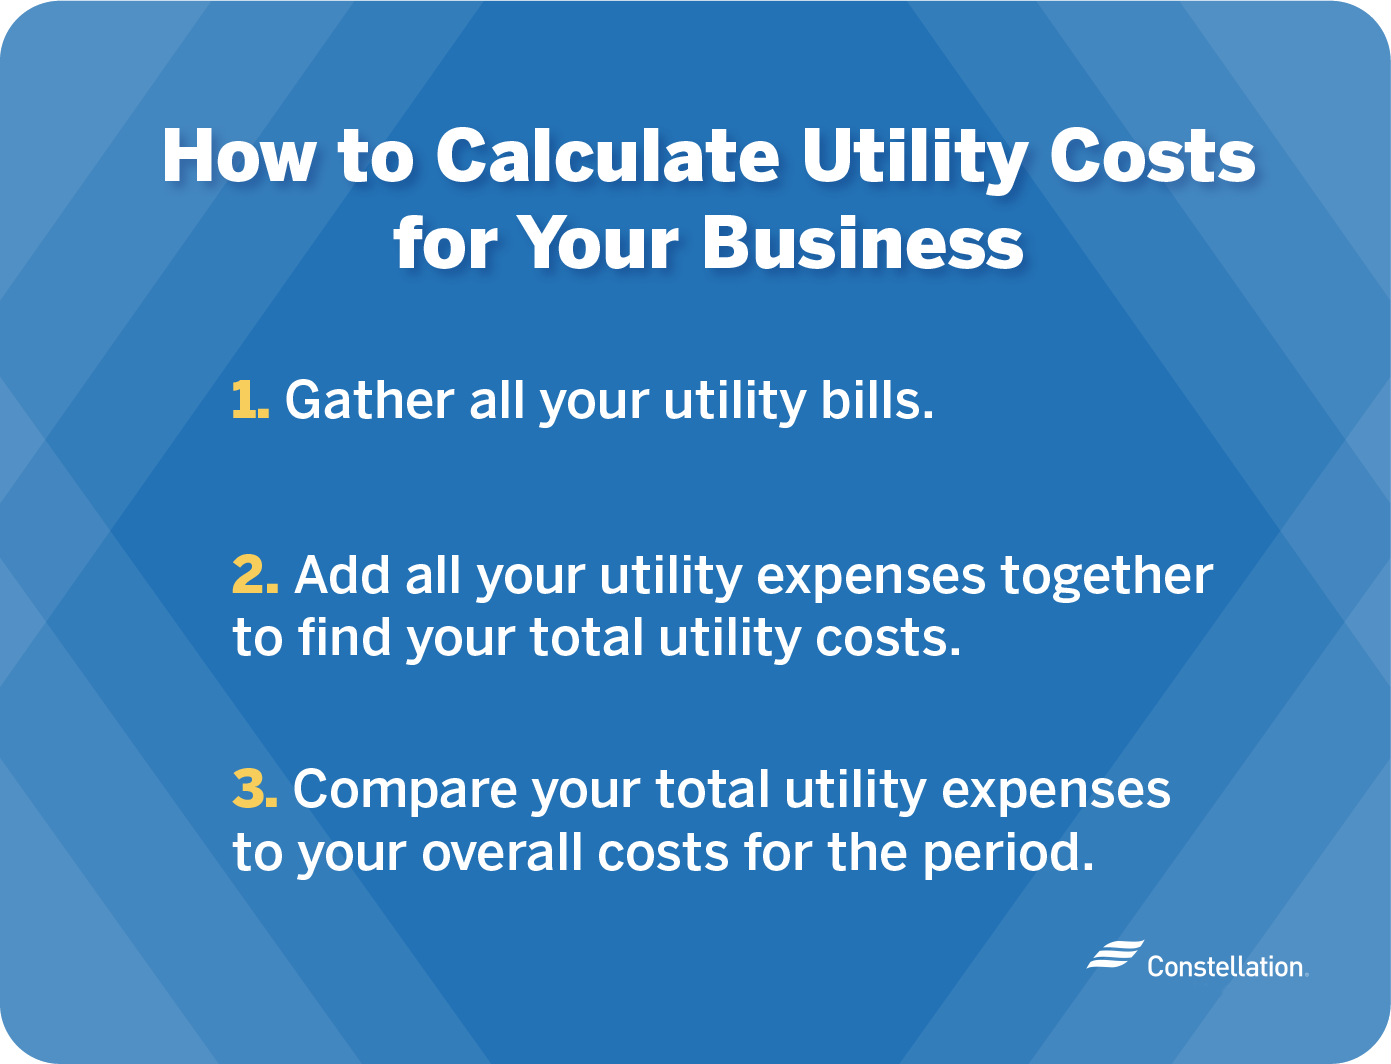 How to calculate the utility costs for your business